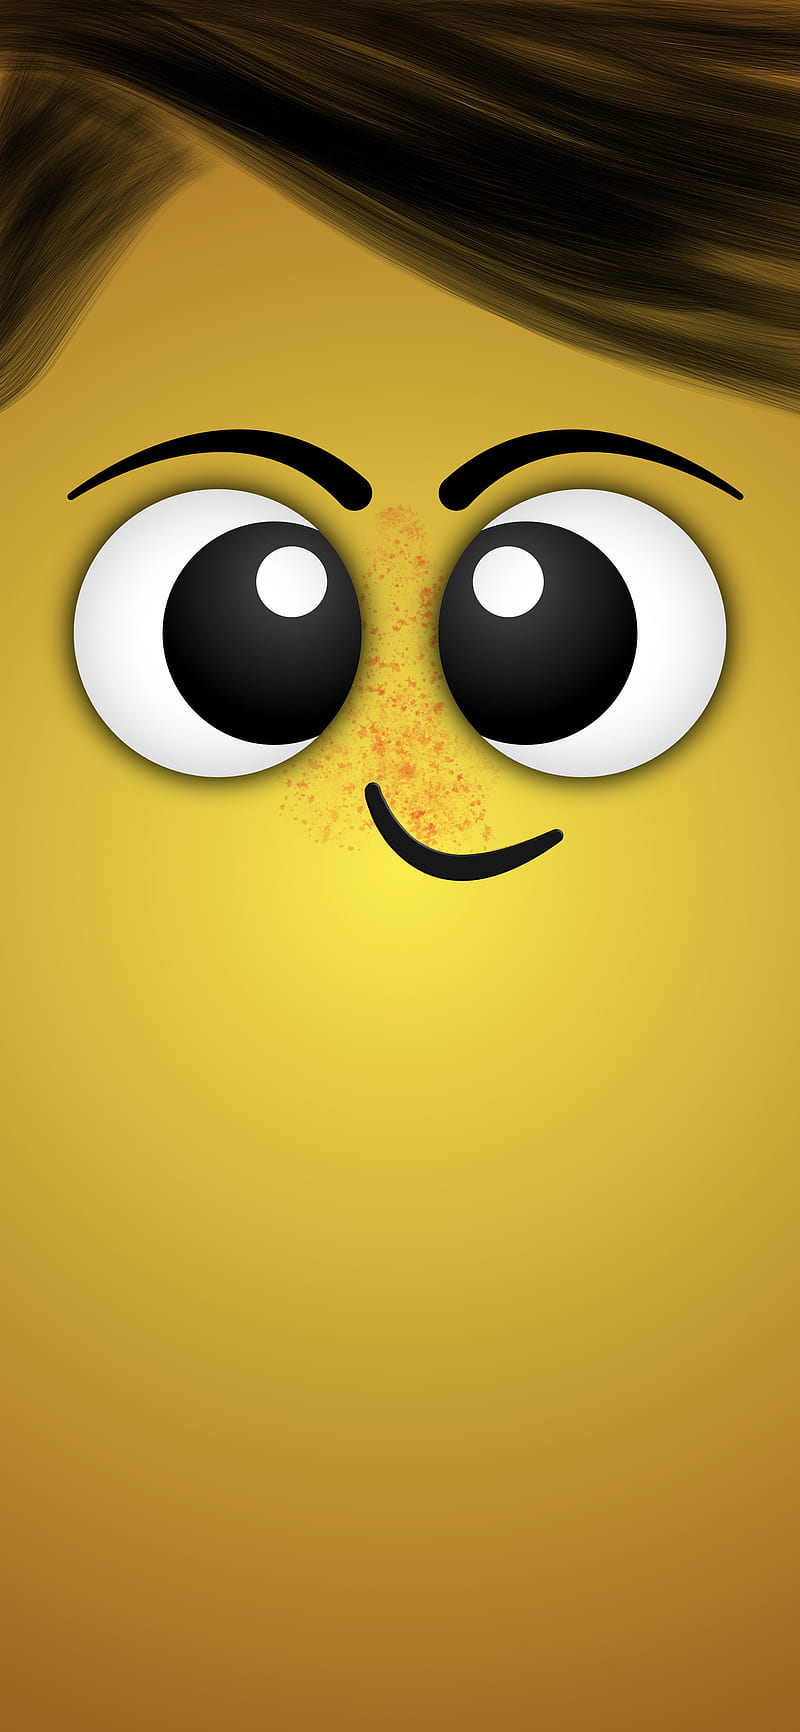 Mobile Face, Faces, Mobile, abstract, adorable, cute, desenho, eyes, face, happy, minimal, naughty, smile, tongue, yellow, HD phone wallpaper